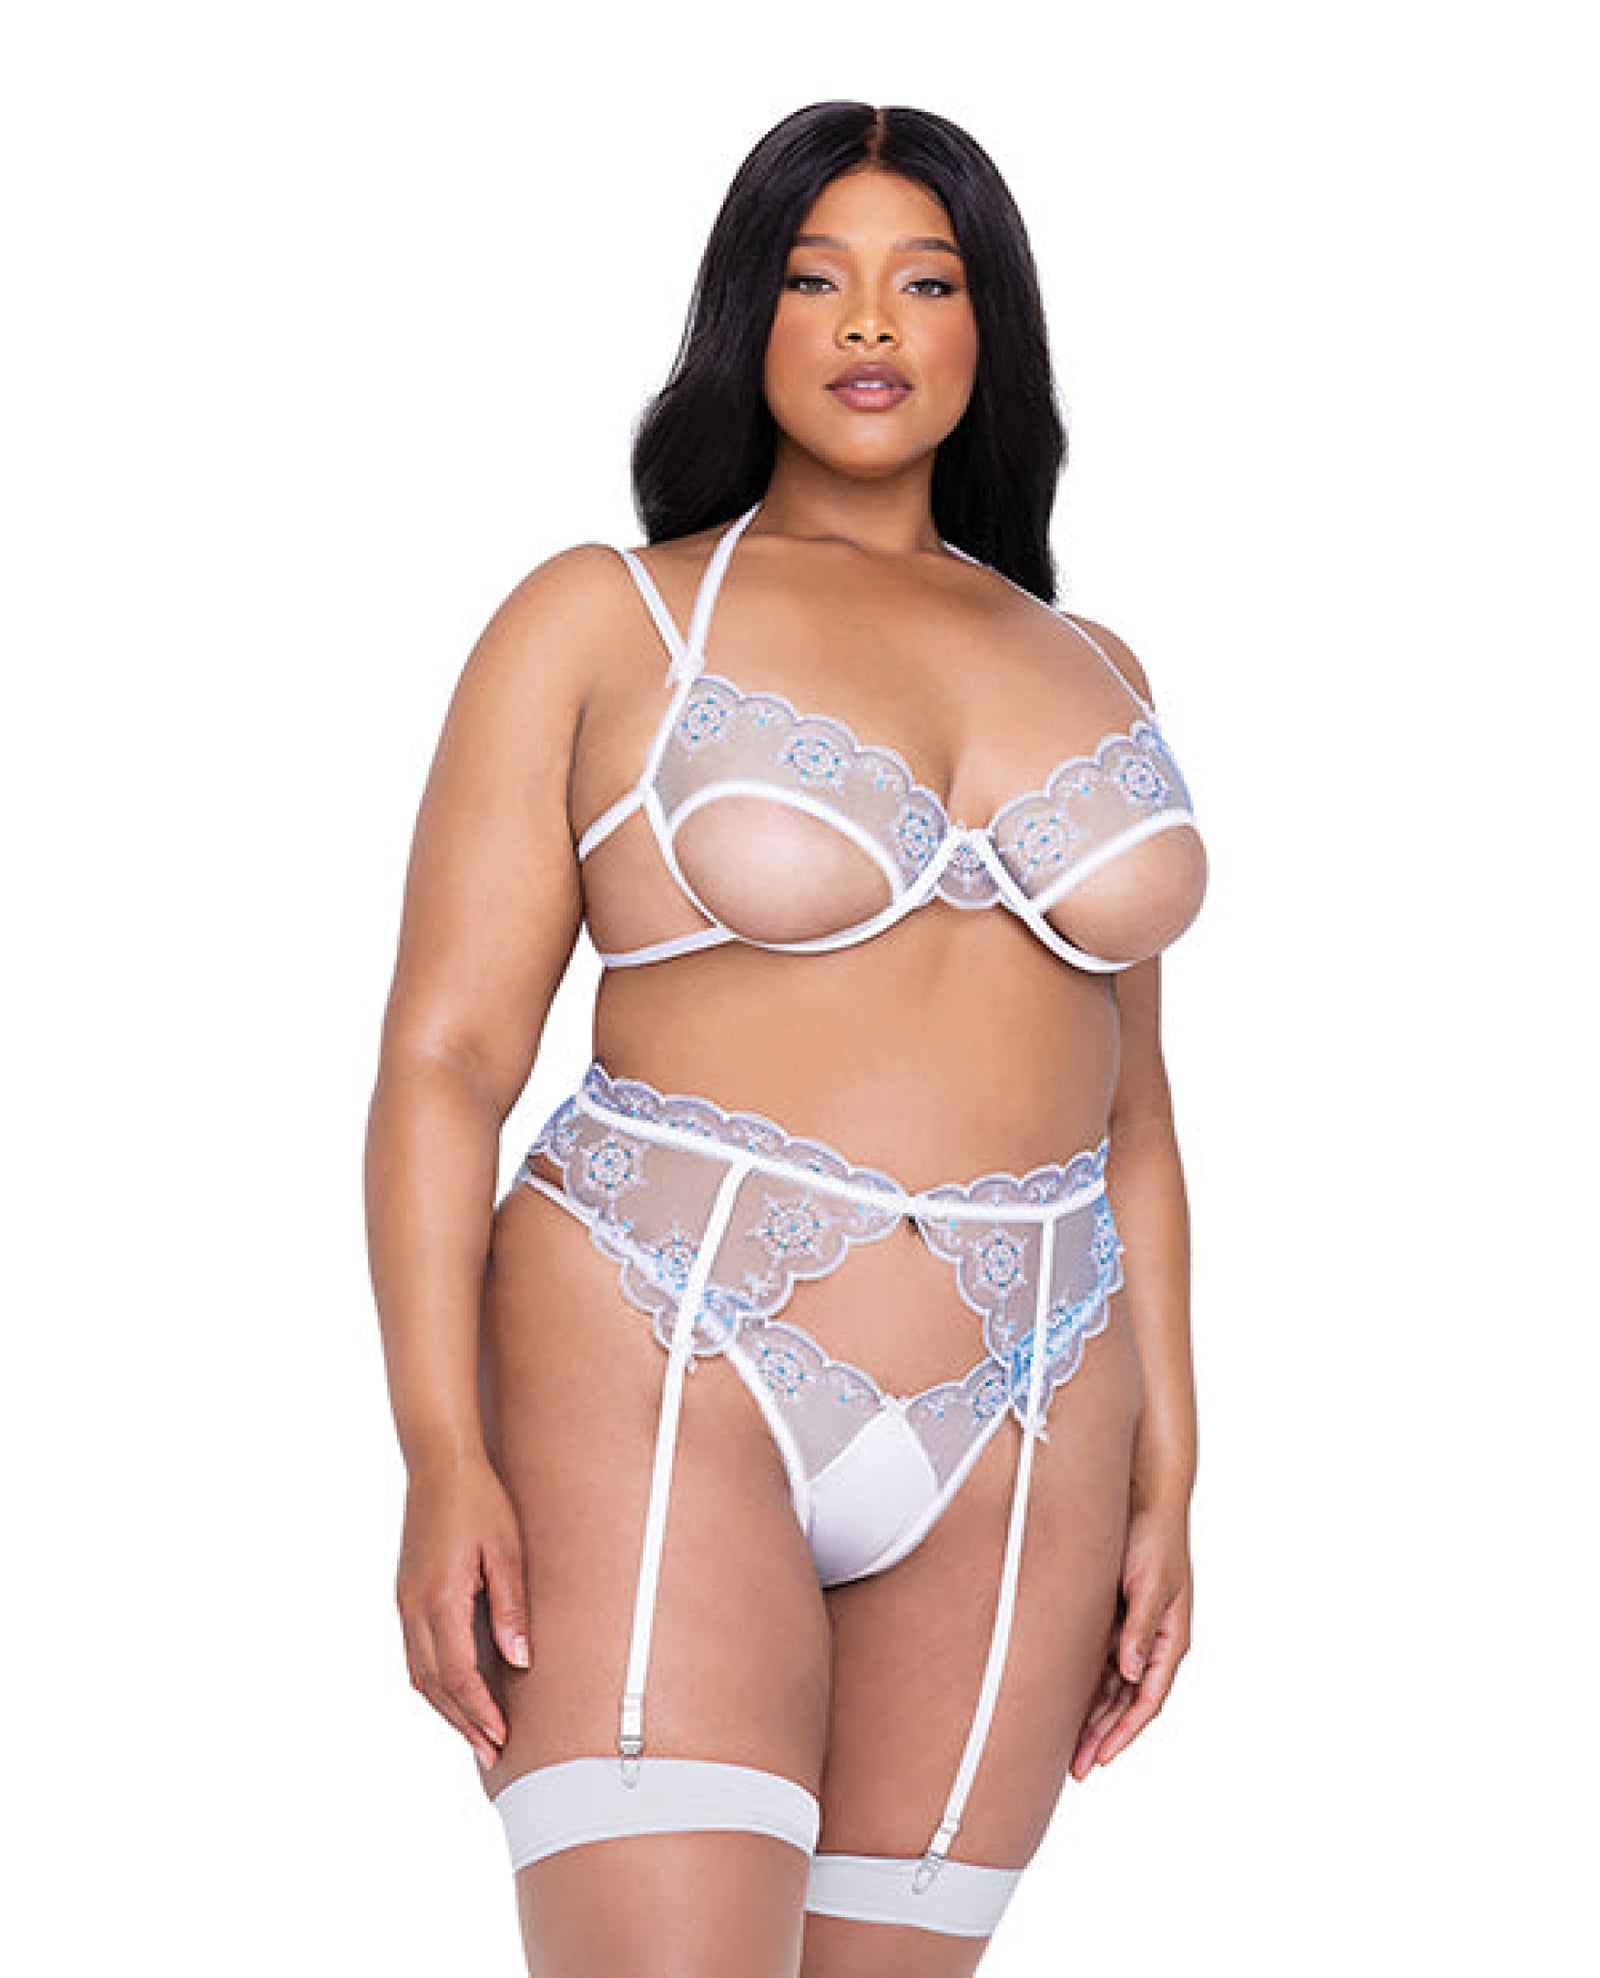 Holiday Snow Queen Metallic Snowflake Embroidered Bra & High Waisted Thong Blue/white Roma Costume